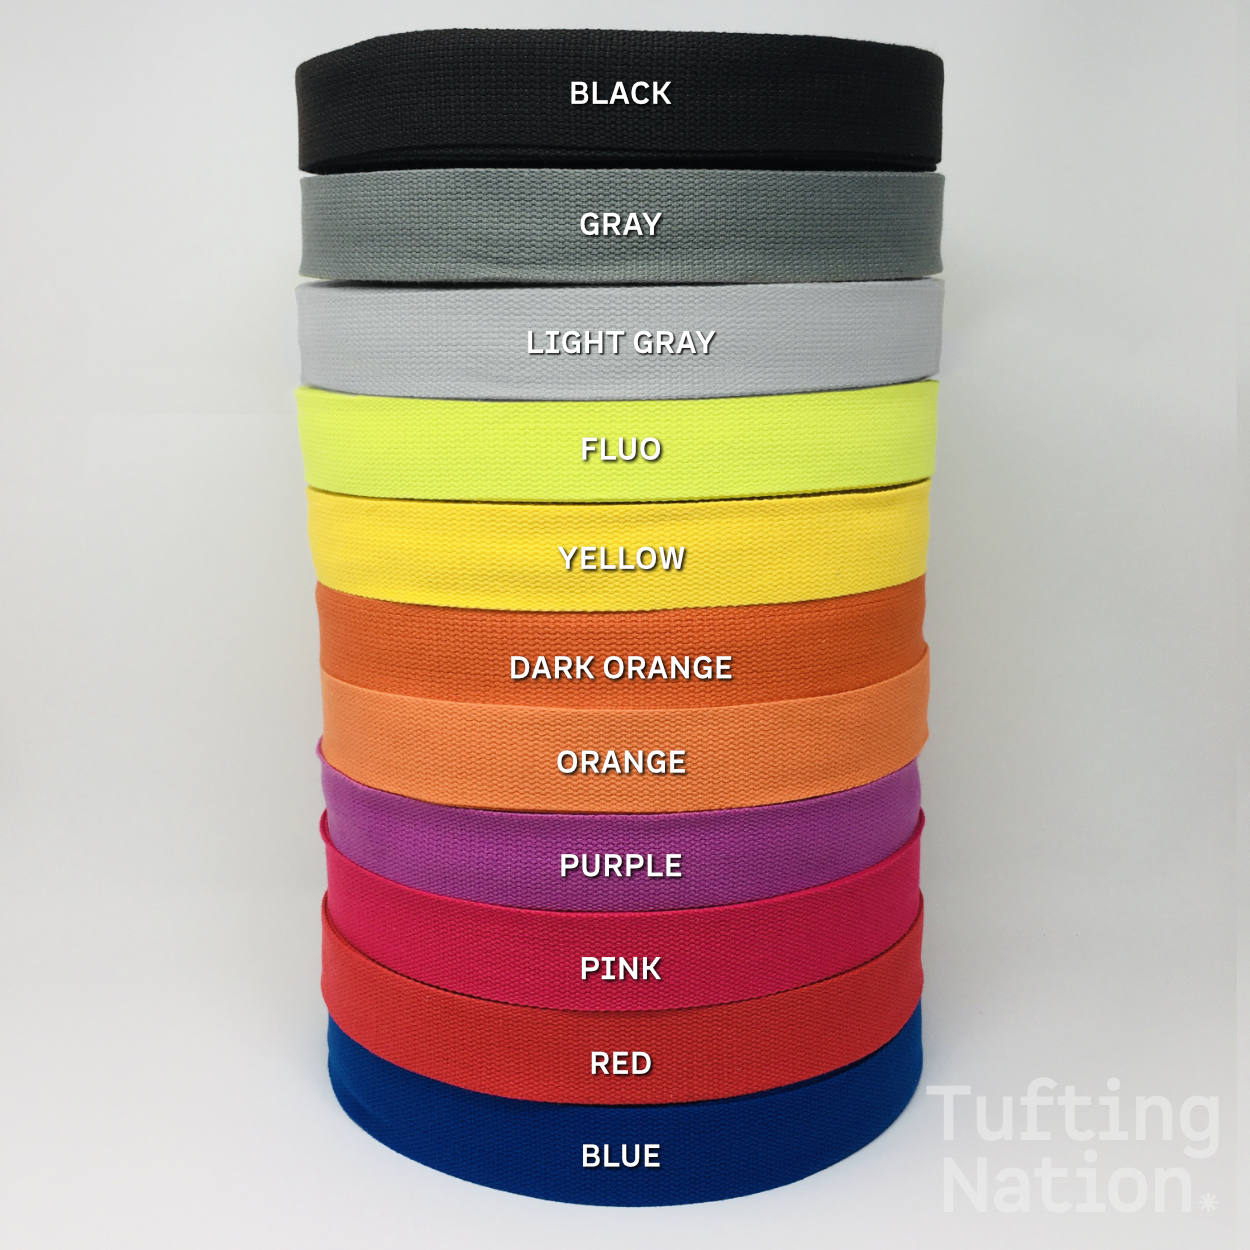 Carpet Binding tape for Rug backing and edge finishing. Available in Black, Gray, Fluo, Yellow, Dark Orange, Orange, Purple, Pink, Red and blue. | TuftingNation